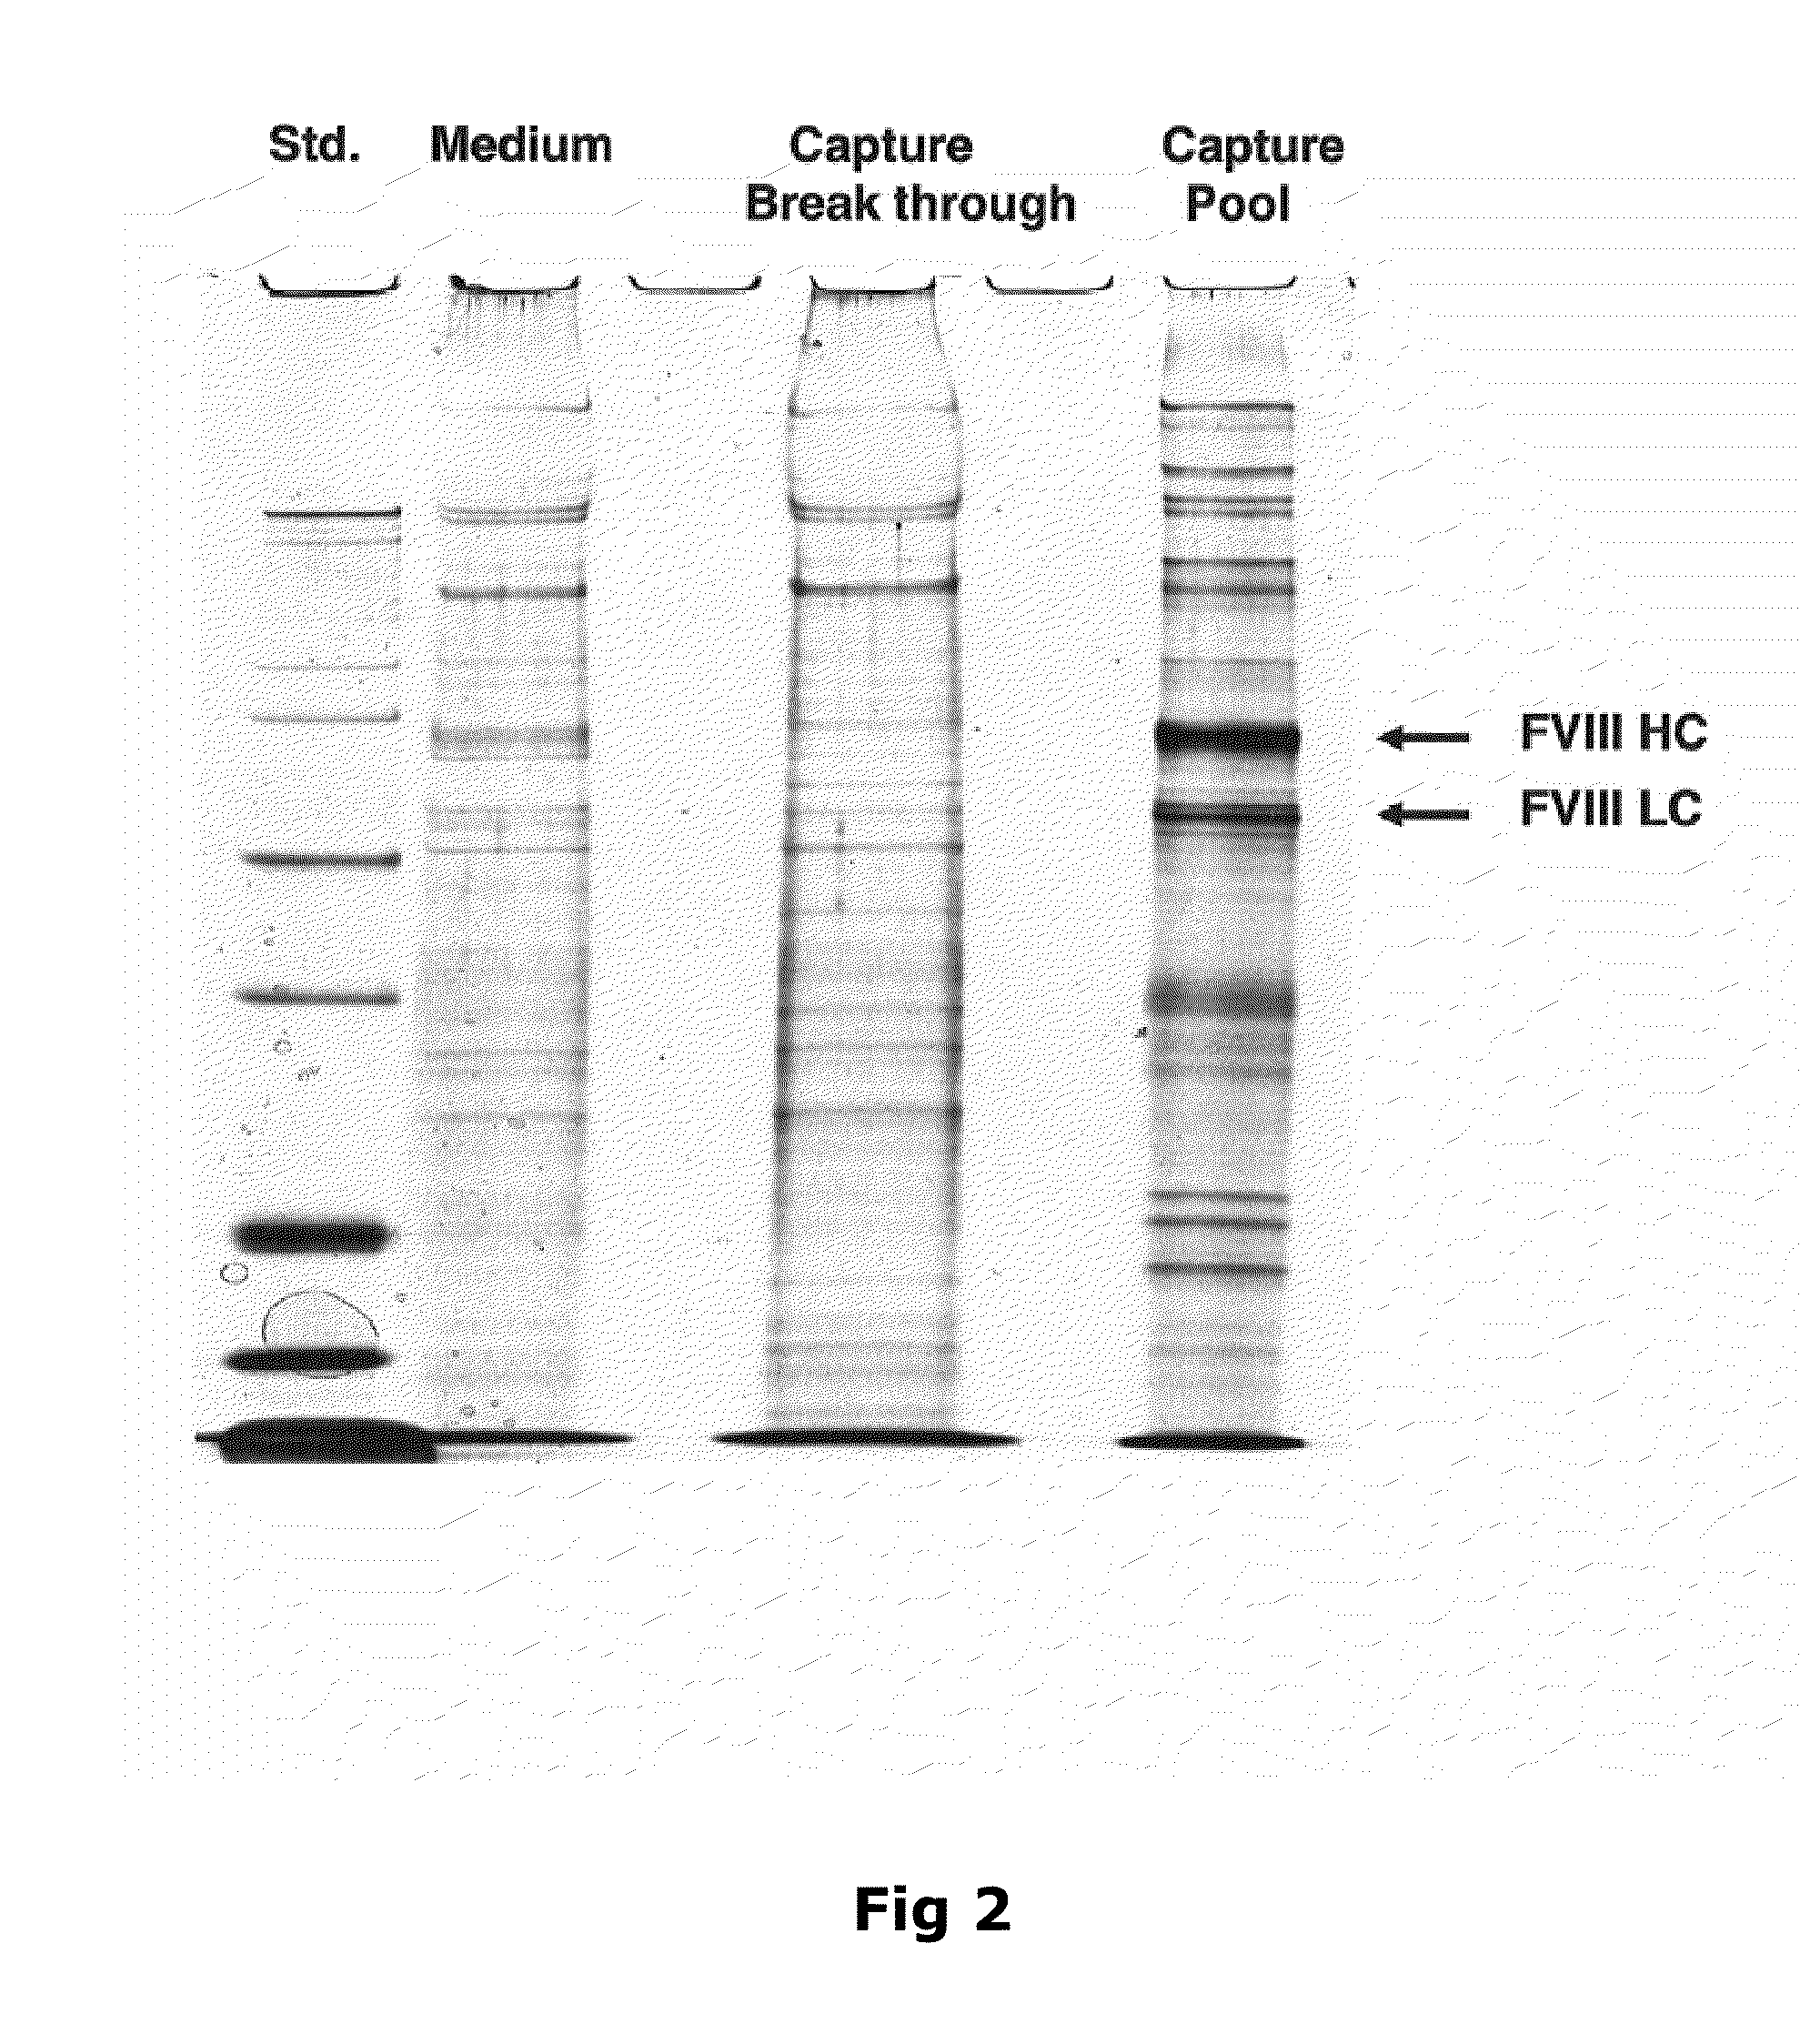 Purification of Factor VIII Using a Mixed-Mode or Multimodal Resin